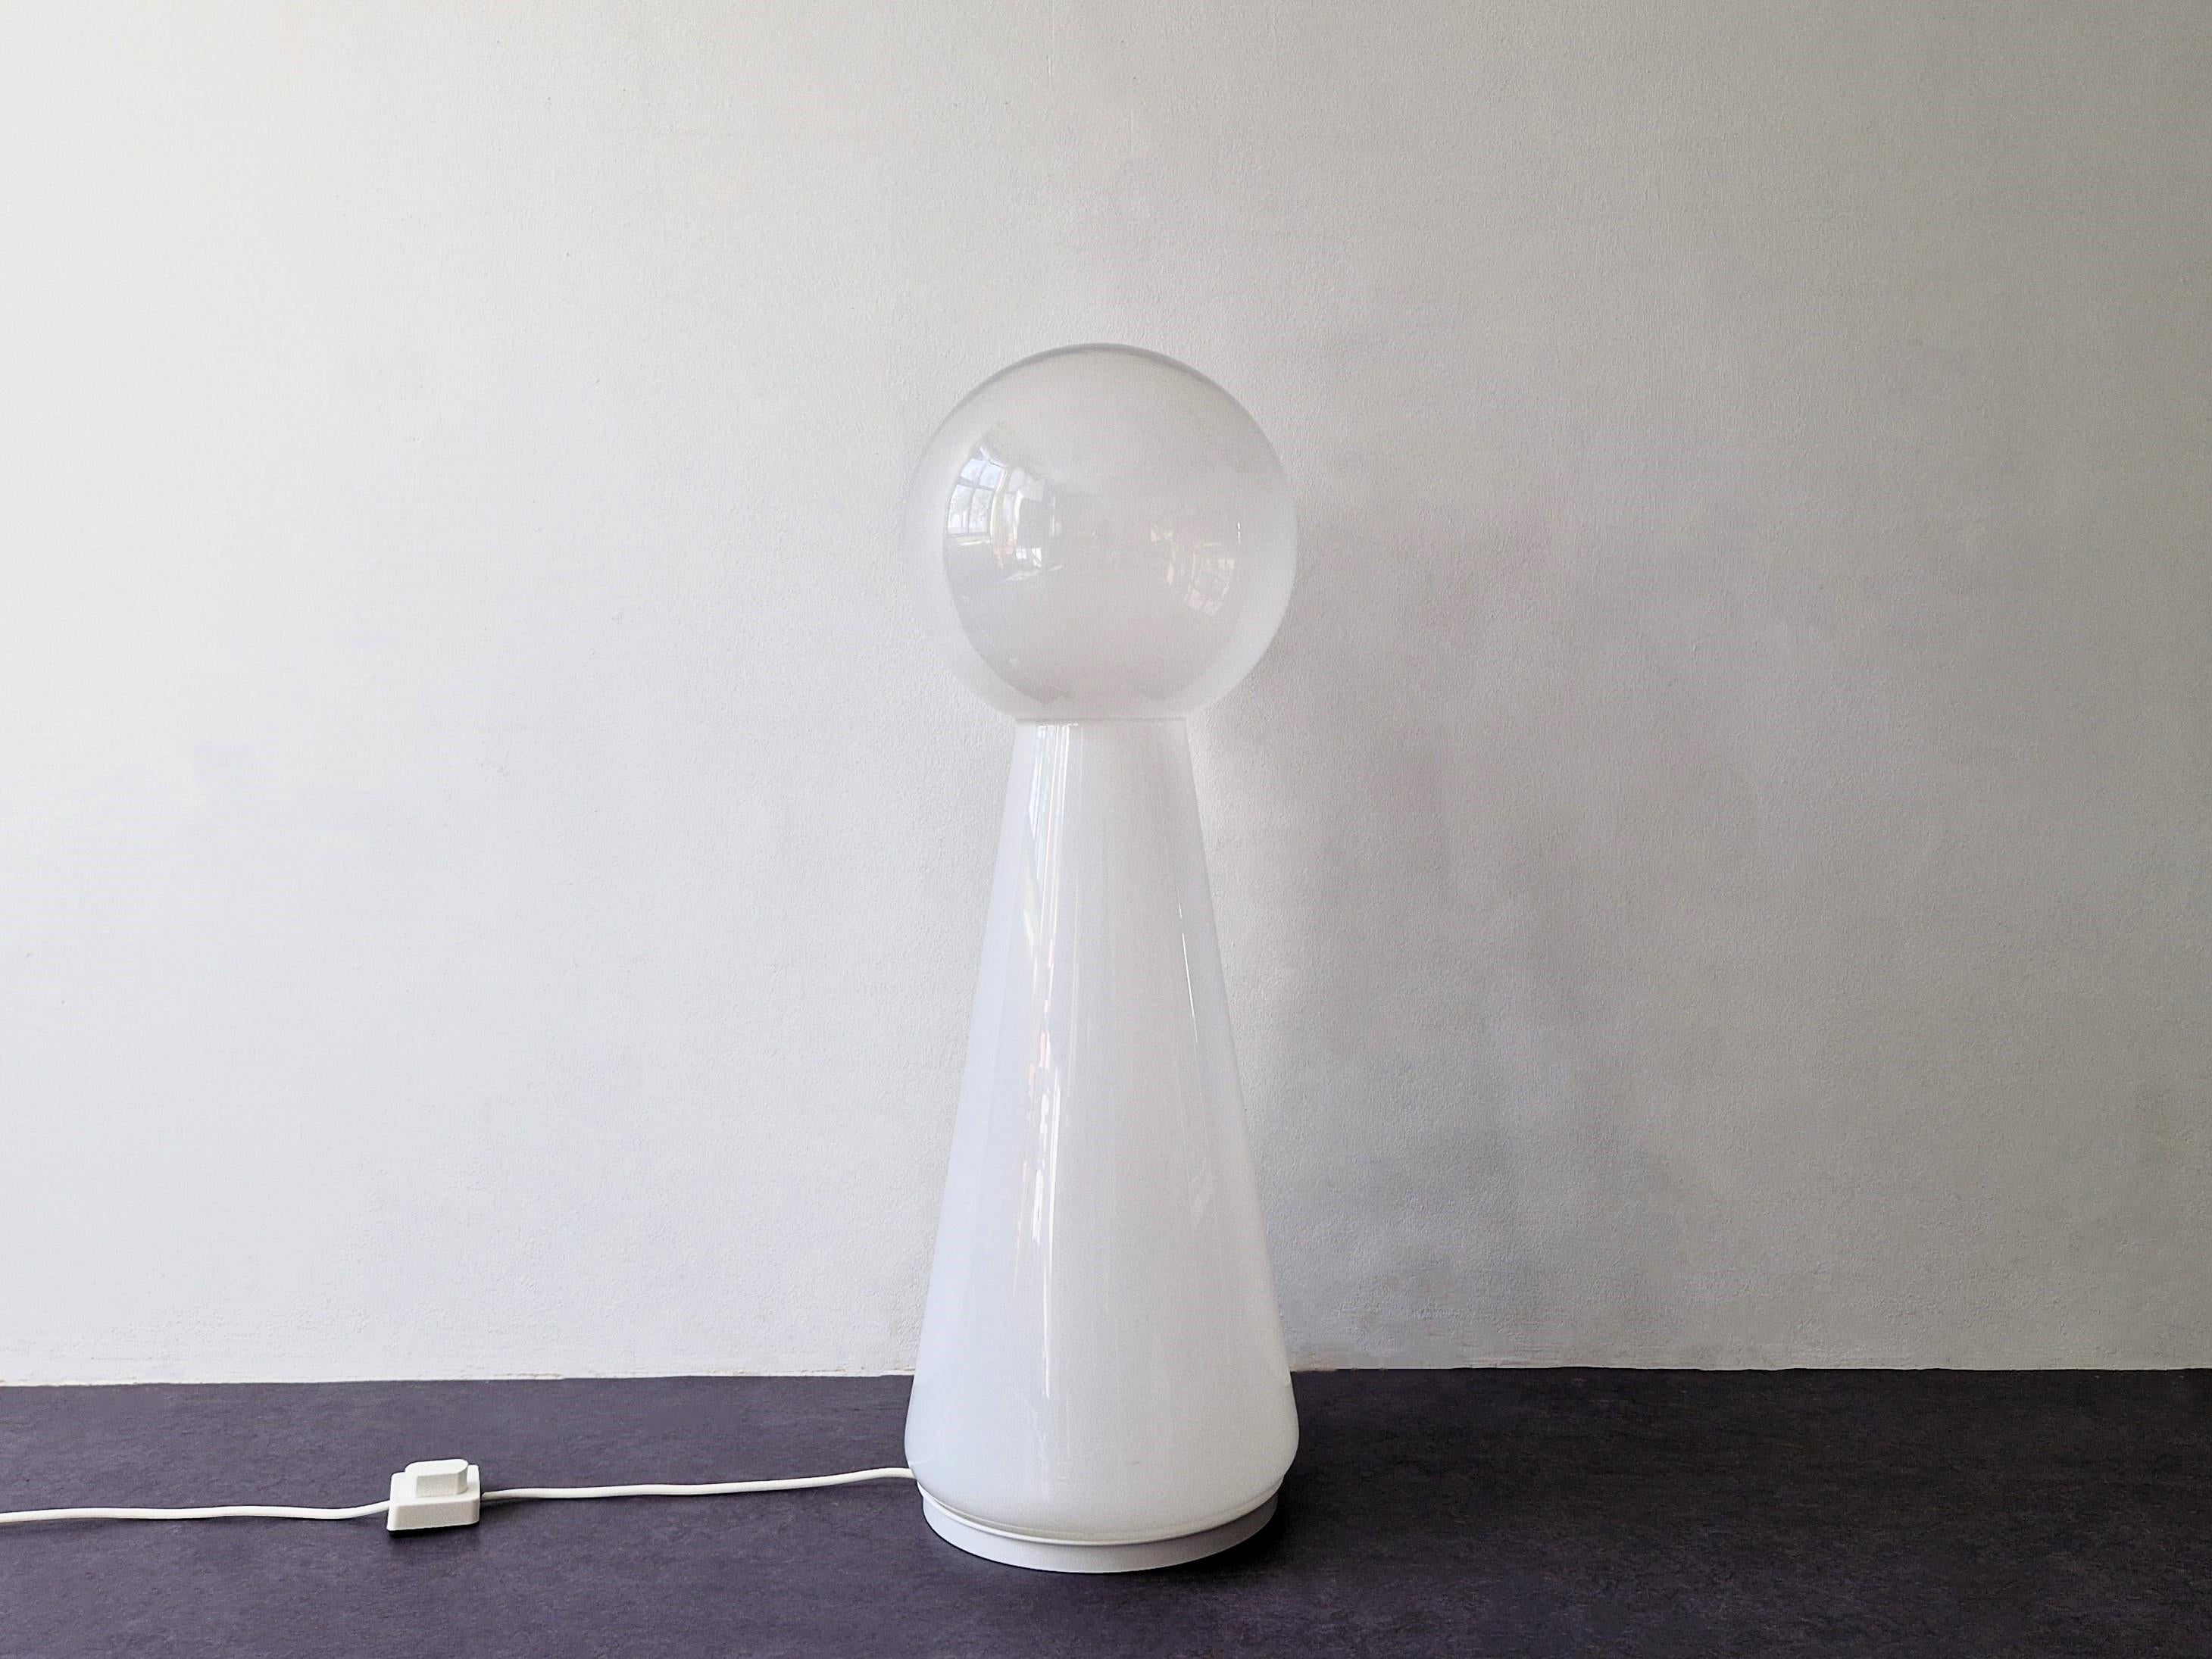 This beautiful geometrically shaped lamp is most likely Italian and hand made/blown out of Murano glass. The lamp goes from a white opal glass base to a clear glass ball at the top, all made out of 1 piece. All together it gives a beautiful light